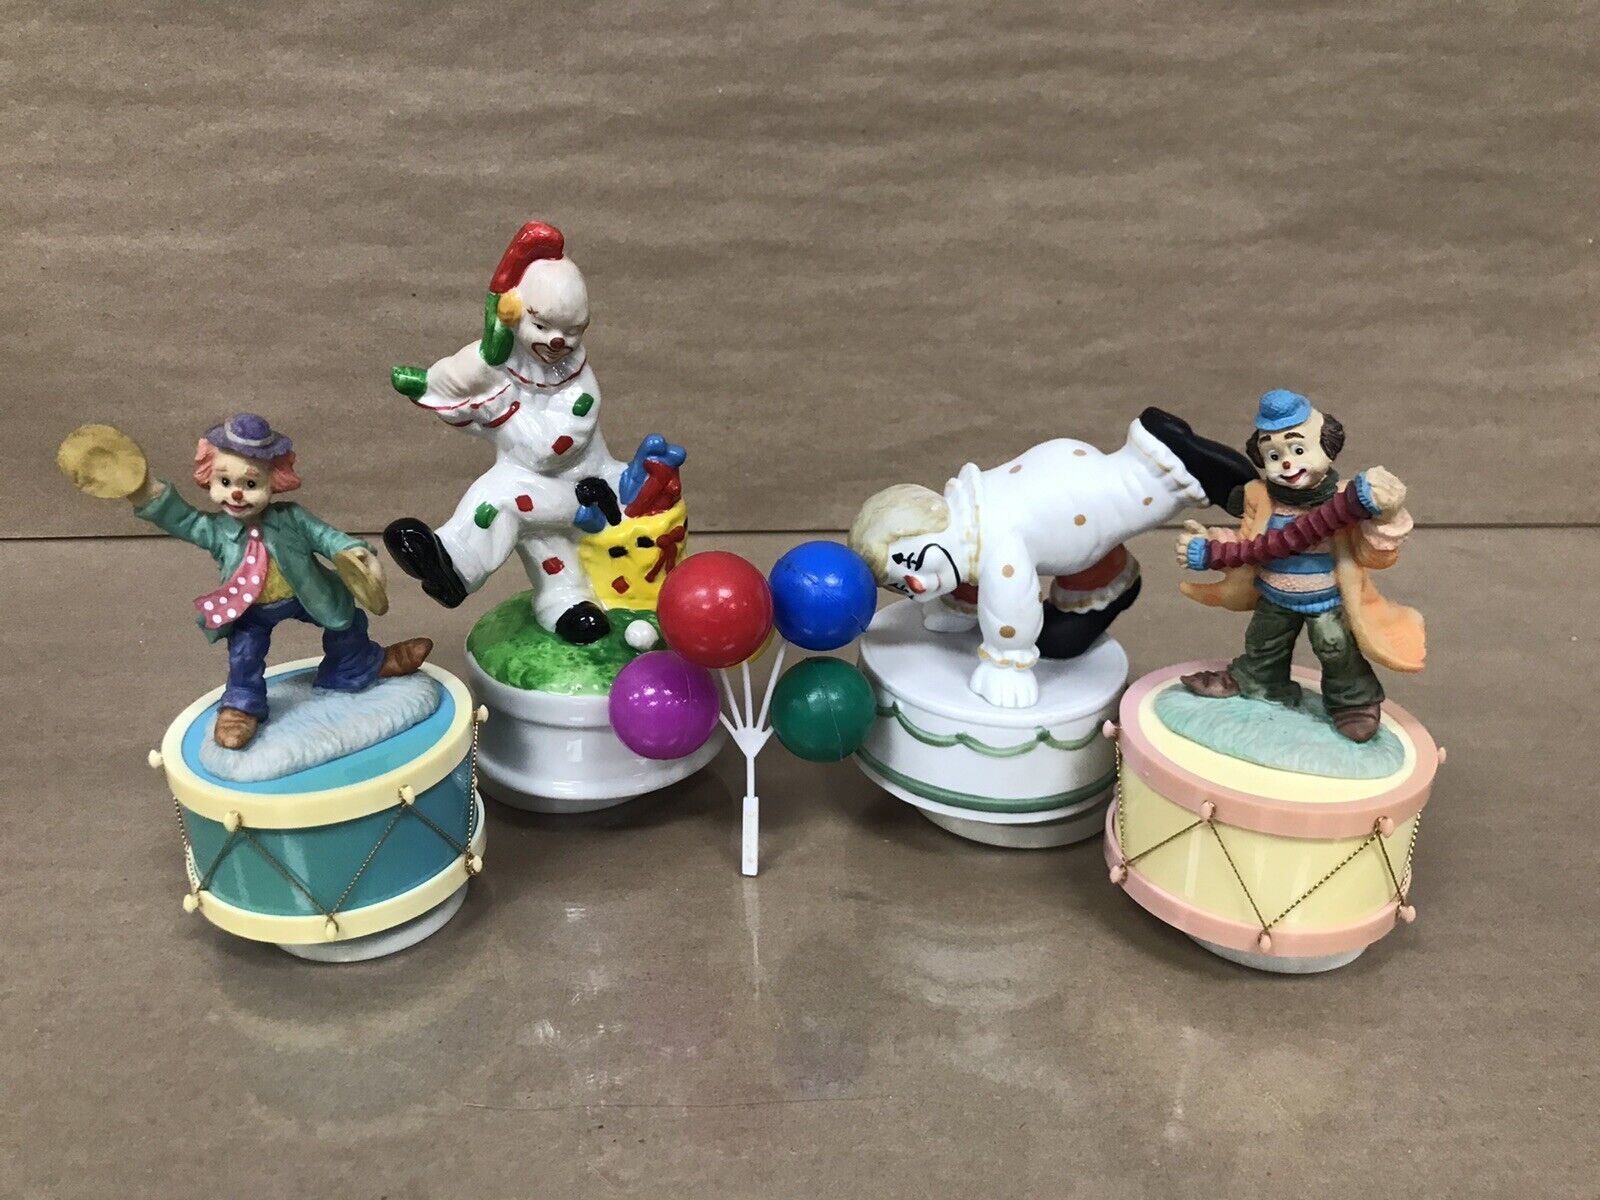 Vintage Lot of 4 Porcelain Circus Clown Wind Up Music Box Musical Figurines